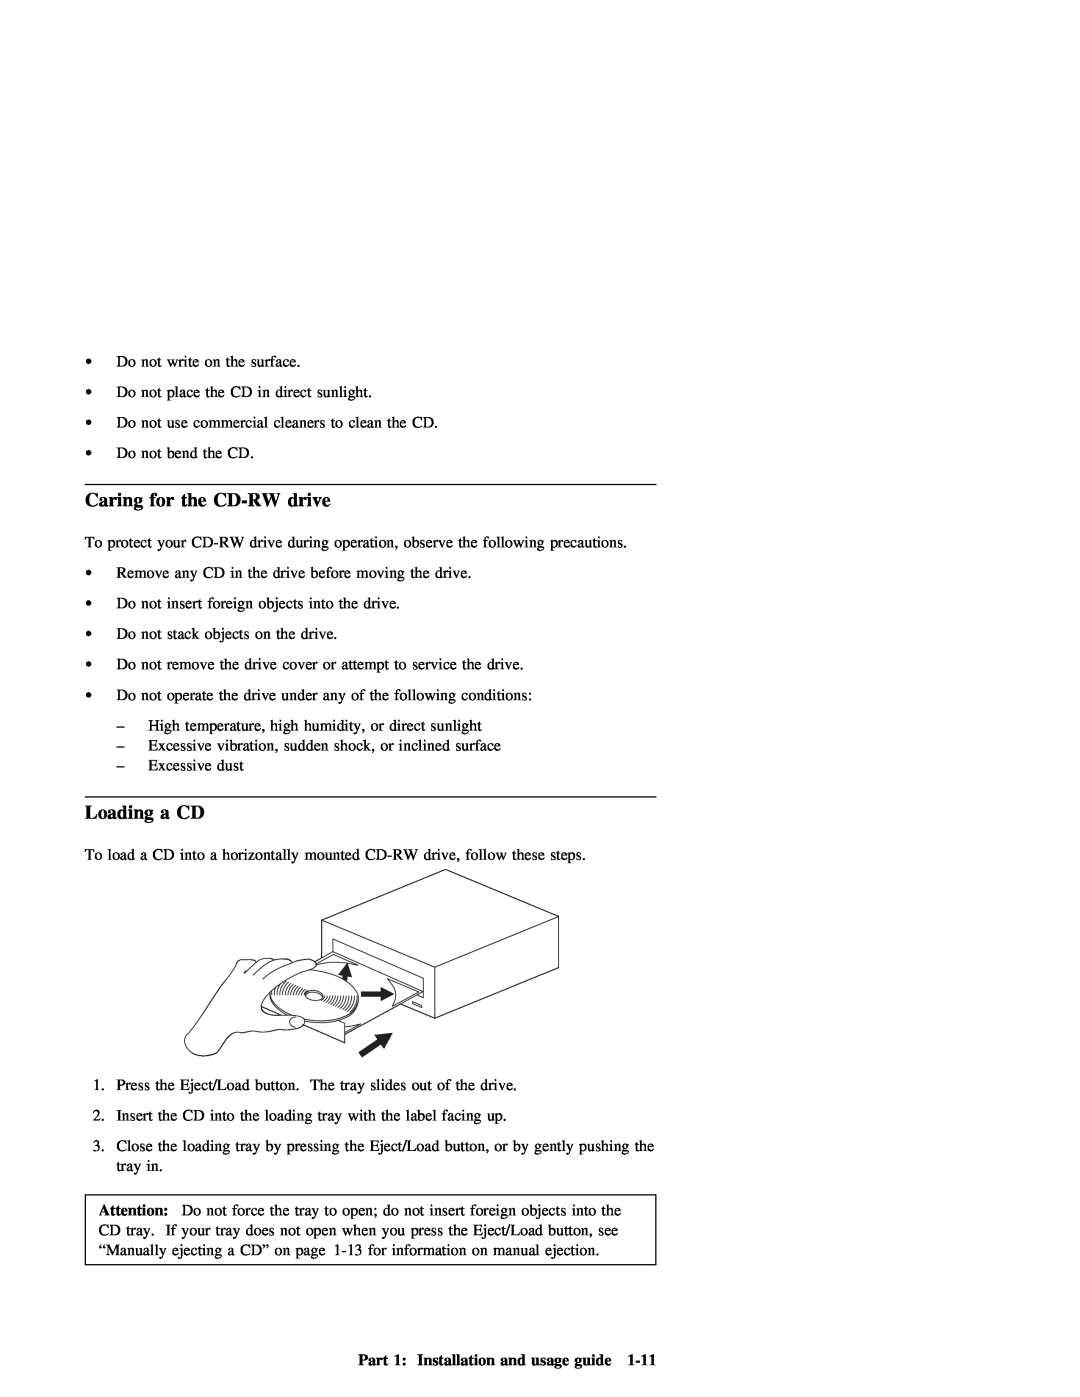 IBM 09N4076 manual Caring for the CD-RW drive, Loading a CD, Part 1 Installation and usage guide 